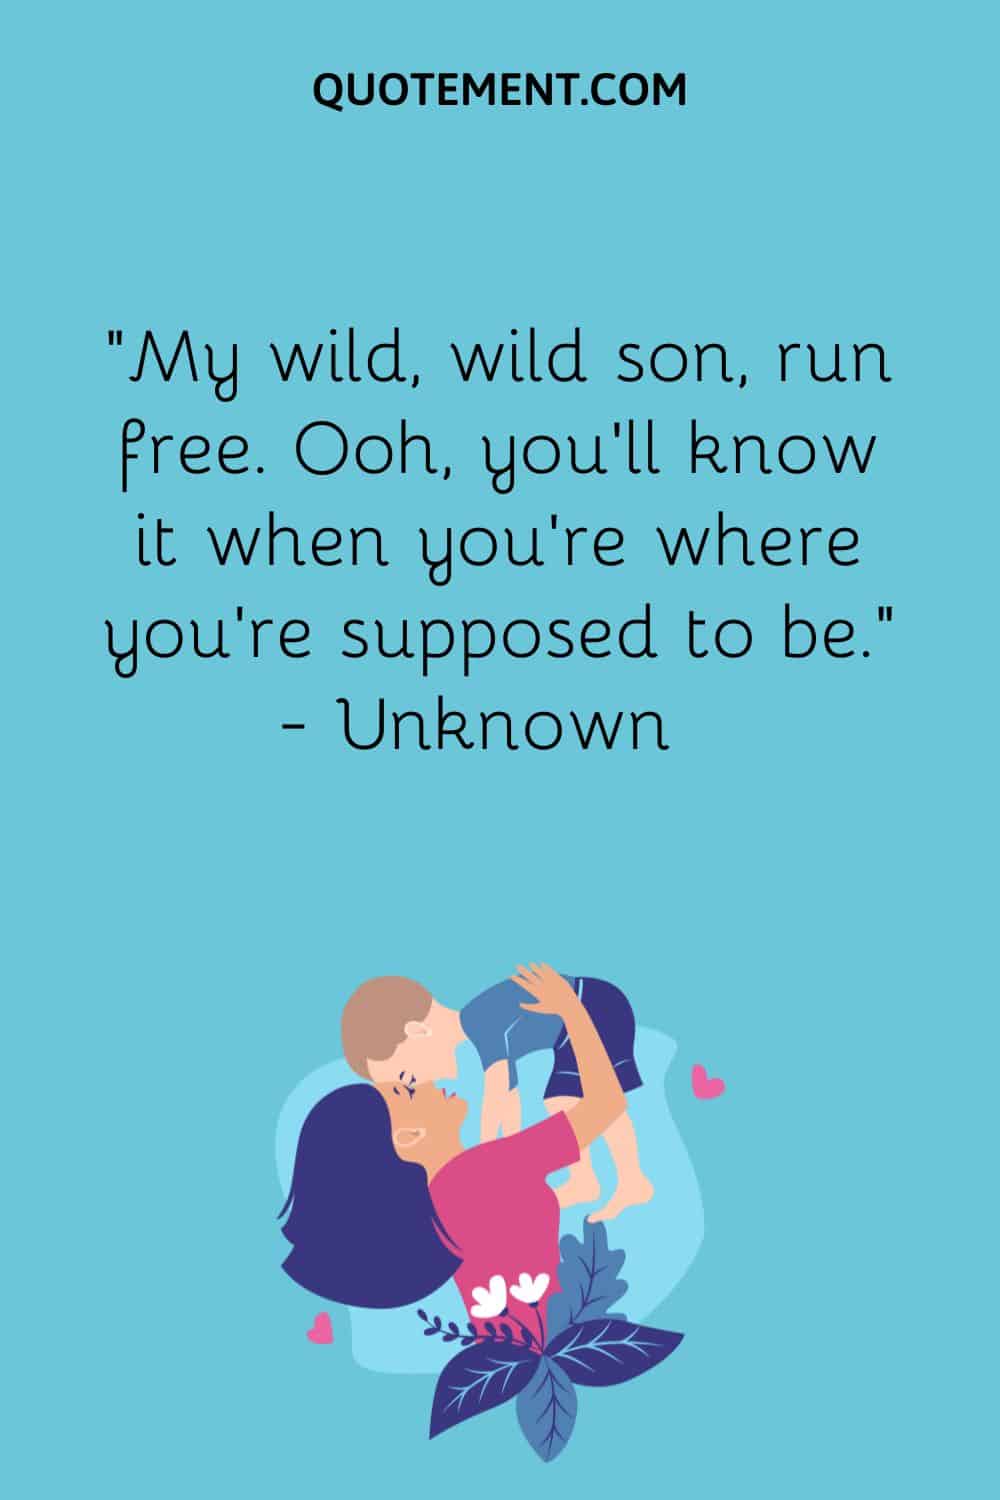 “My wild, wild son, run free. Ooh, you’ll know it when you’re where you’re supposed to be.” — Unknown